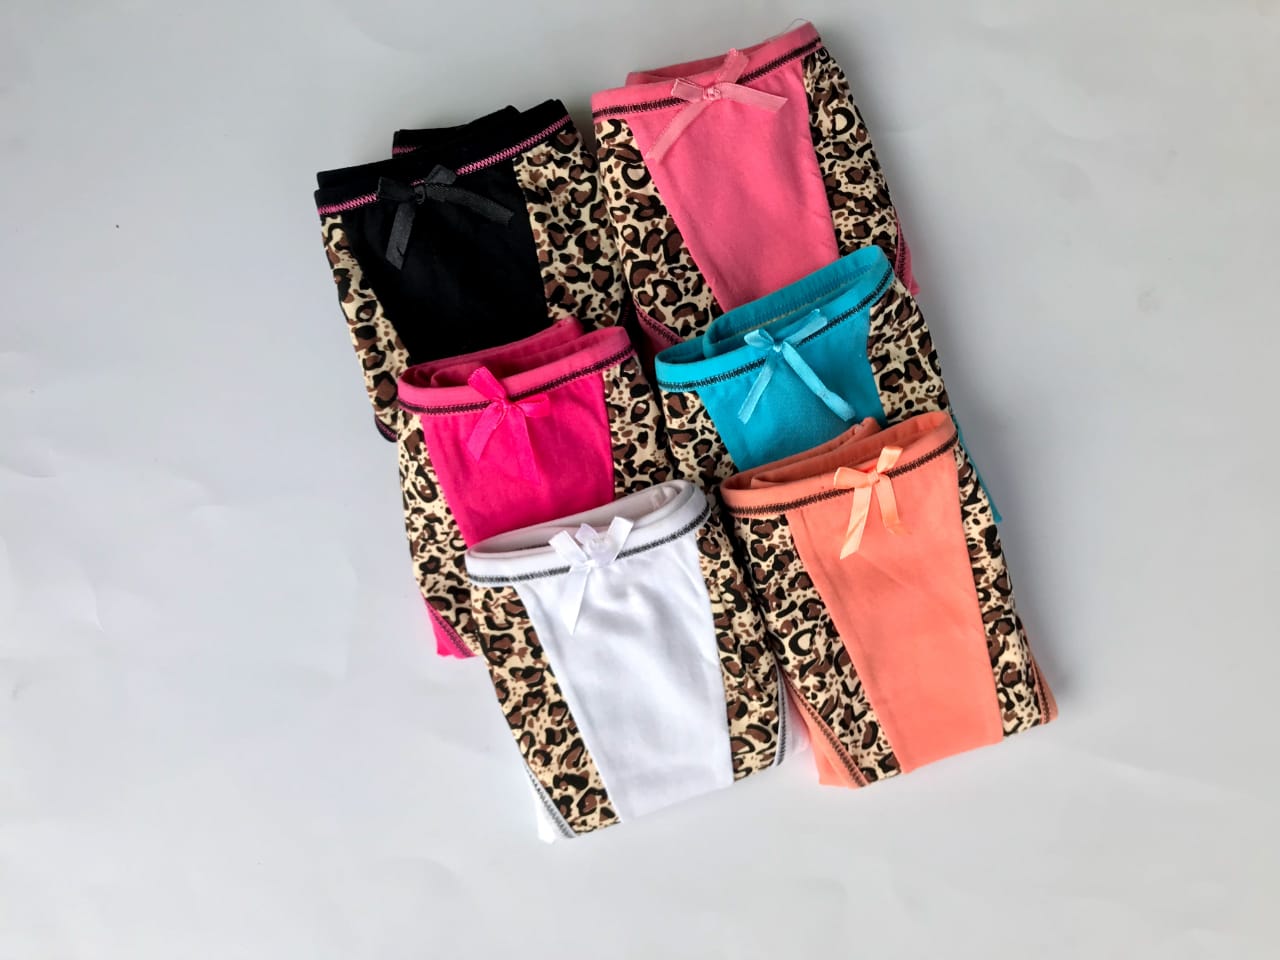 Pack of 5 Different Color Panties